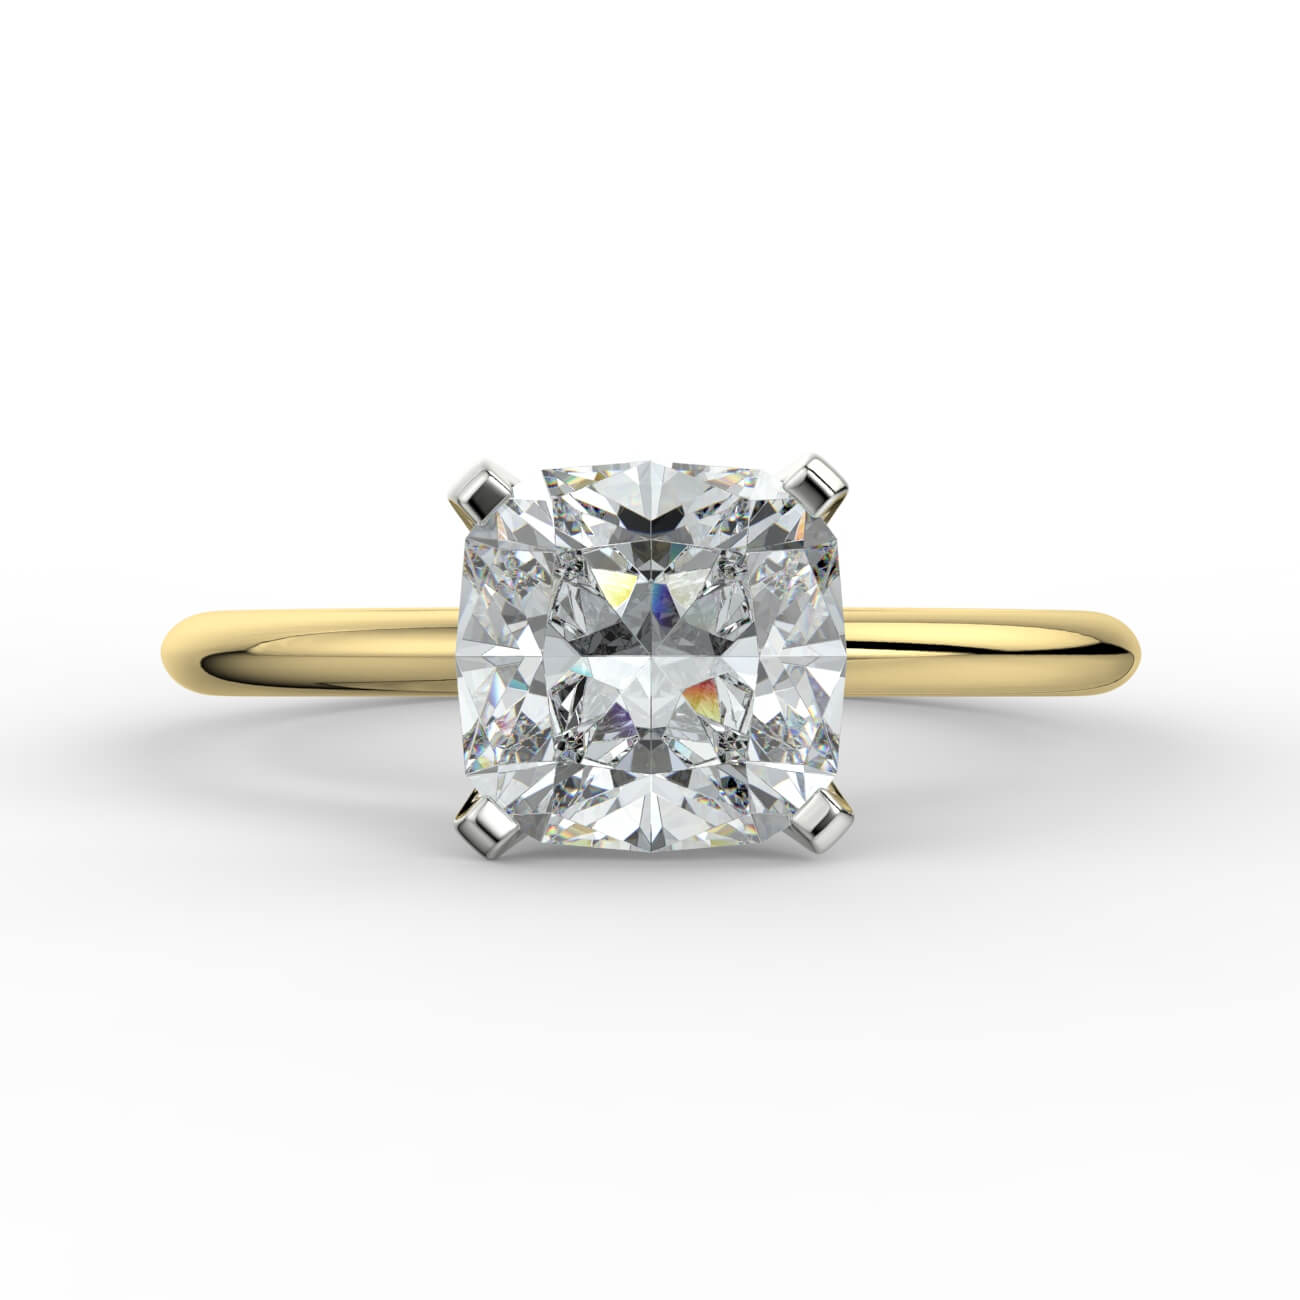 Knife-edge solitaire cushion cut diamond engagement ring in yellow and white gold – Australian Diamond Network